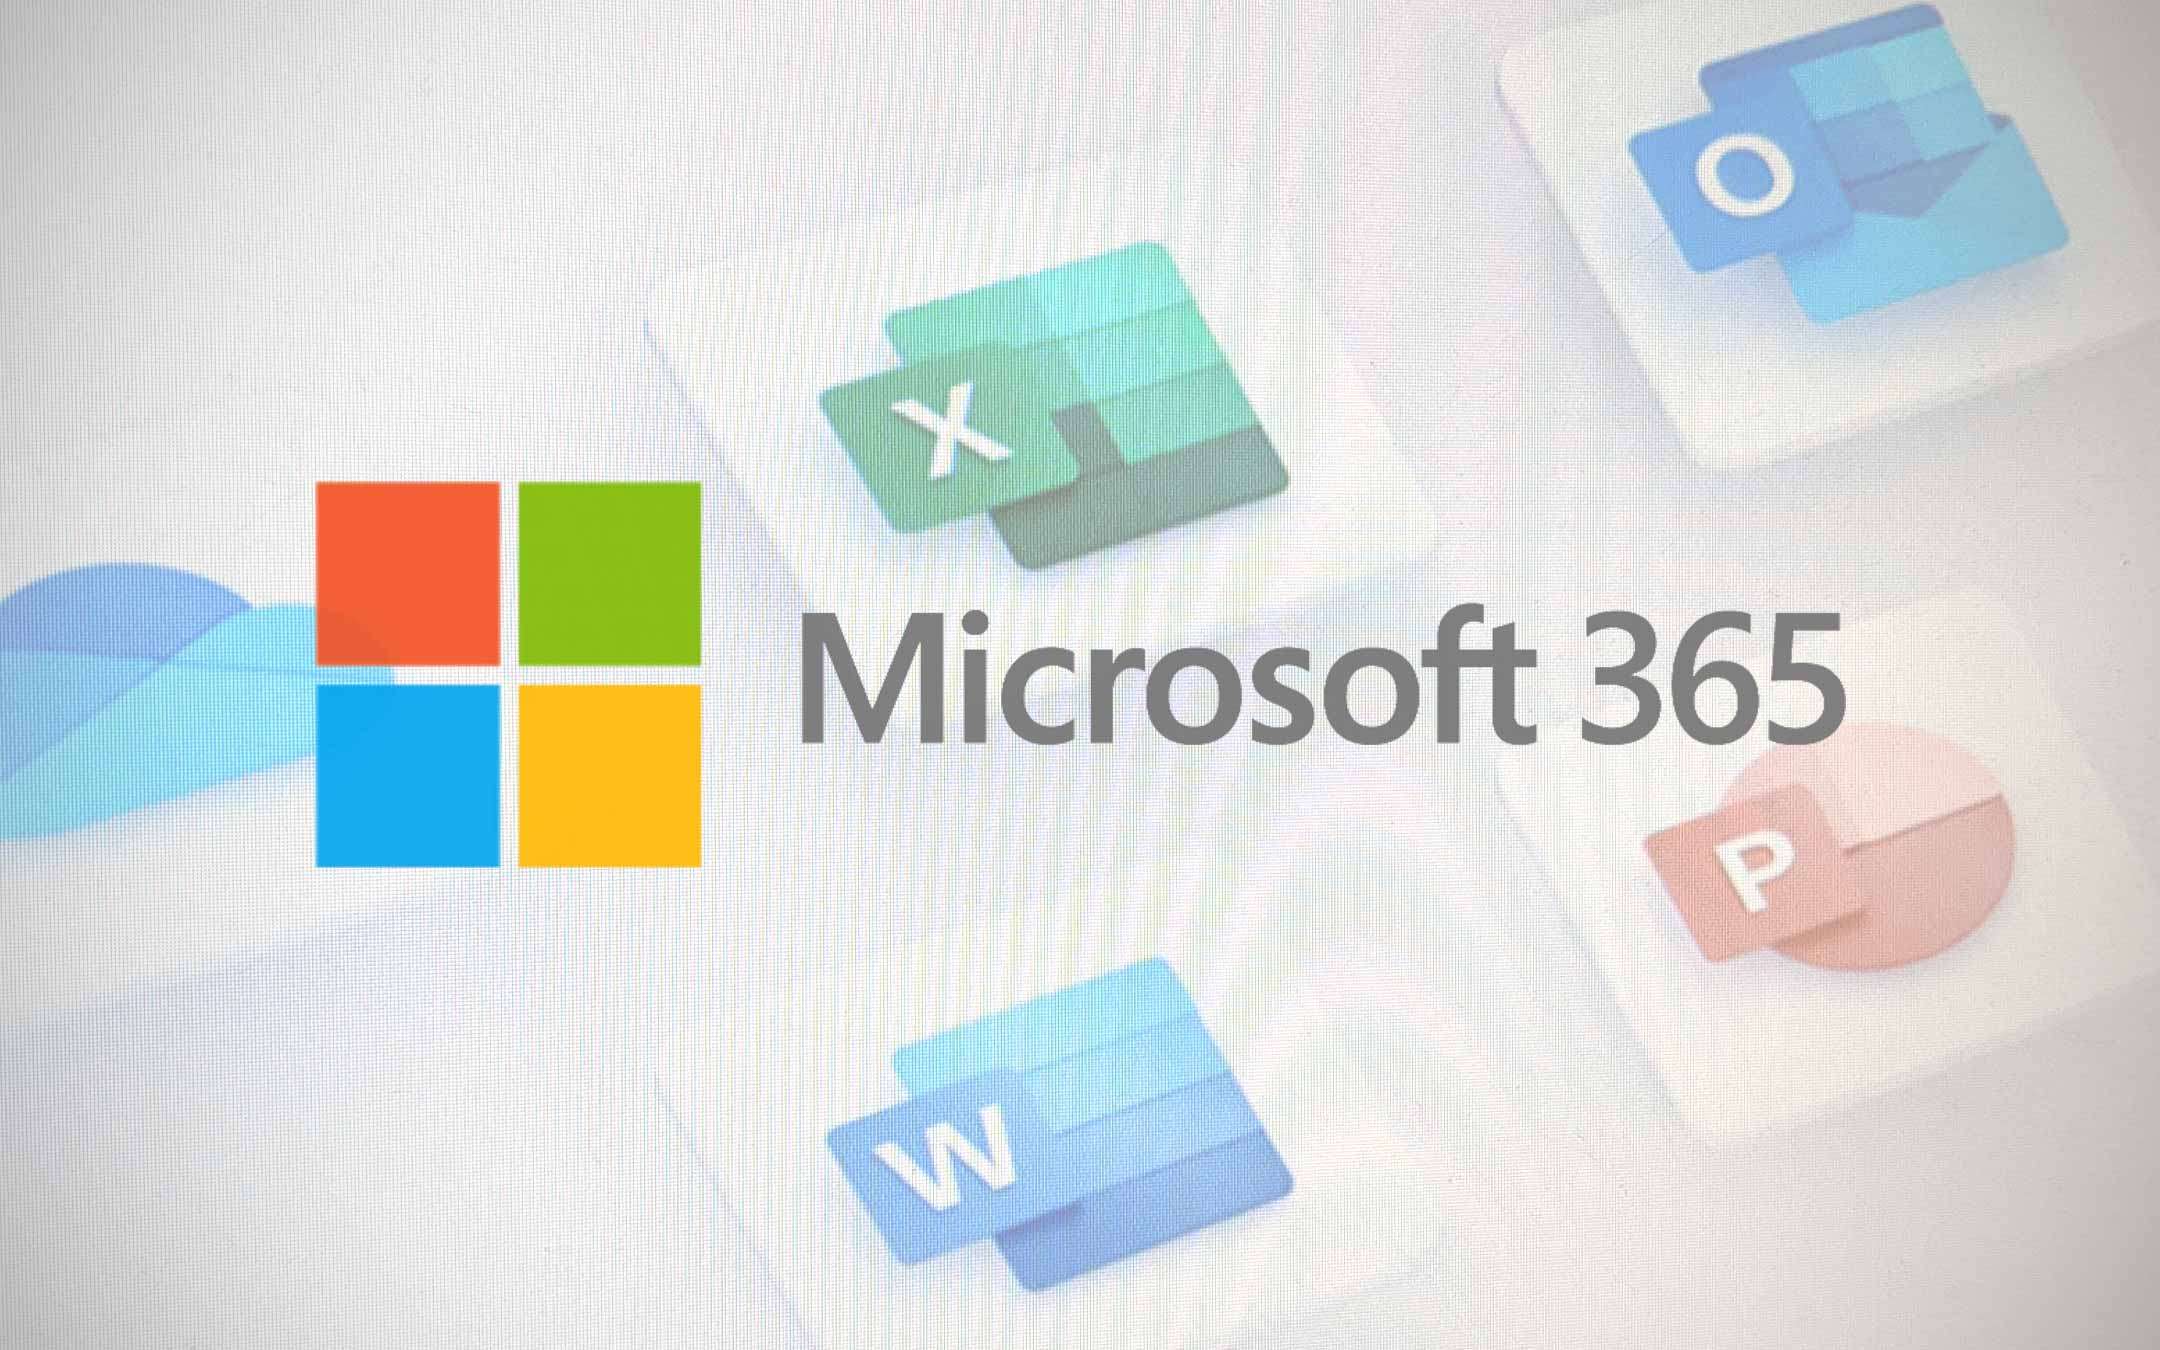 Discounted Microsoft 365 subscriptions on Amazon